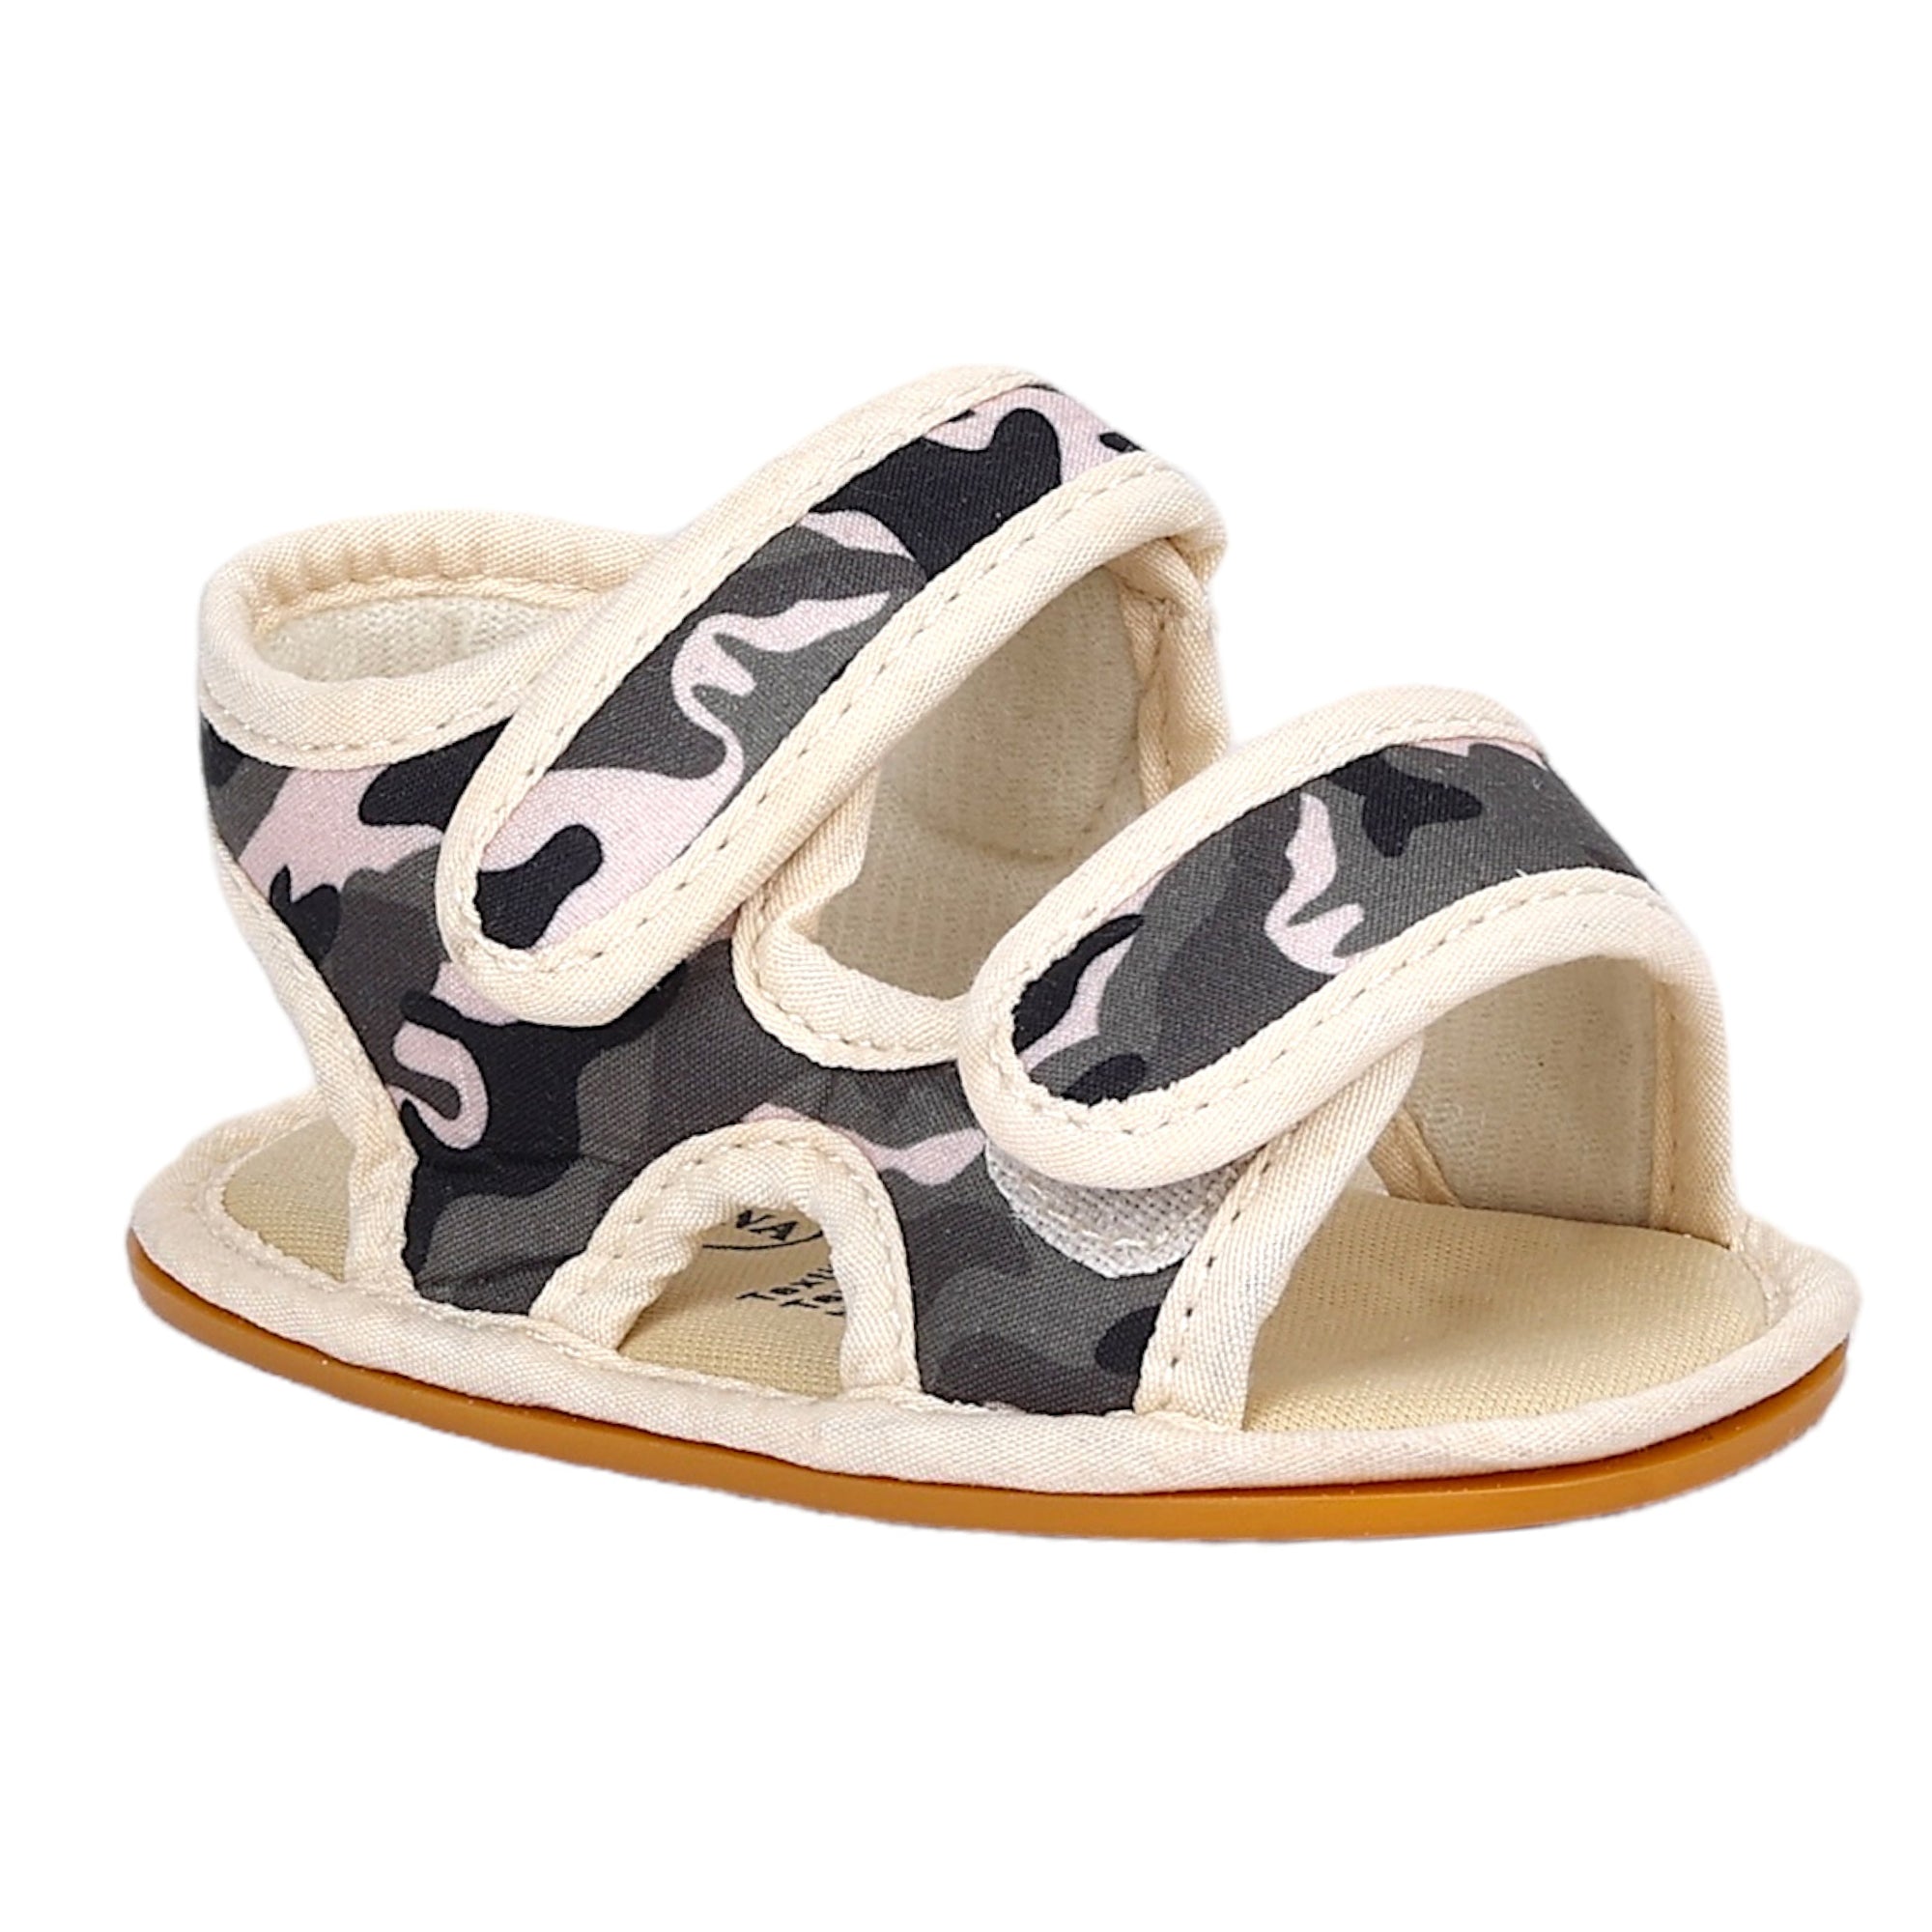 Baby Moo Camouflage Print Anti-Skid Velcro Floater Sandals - Beige, Military